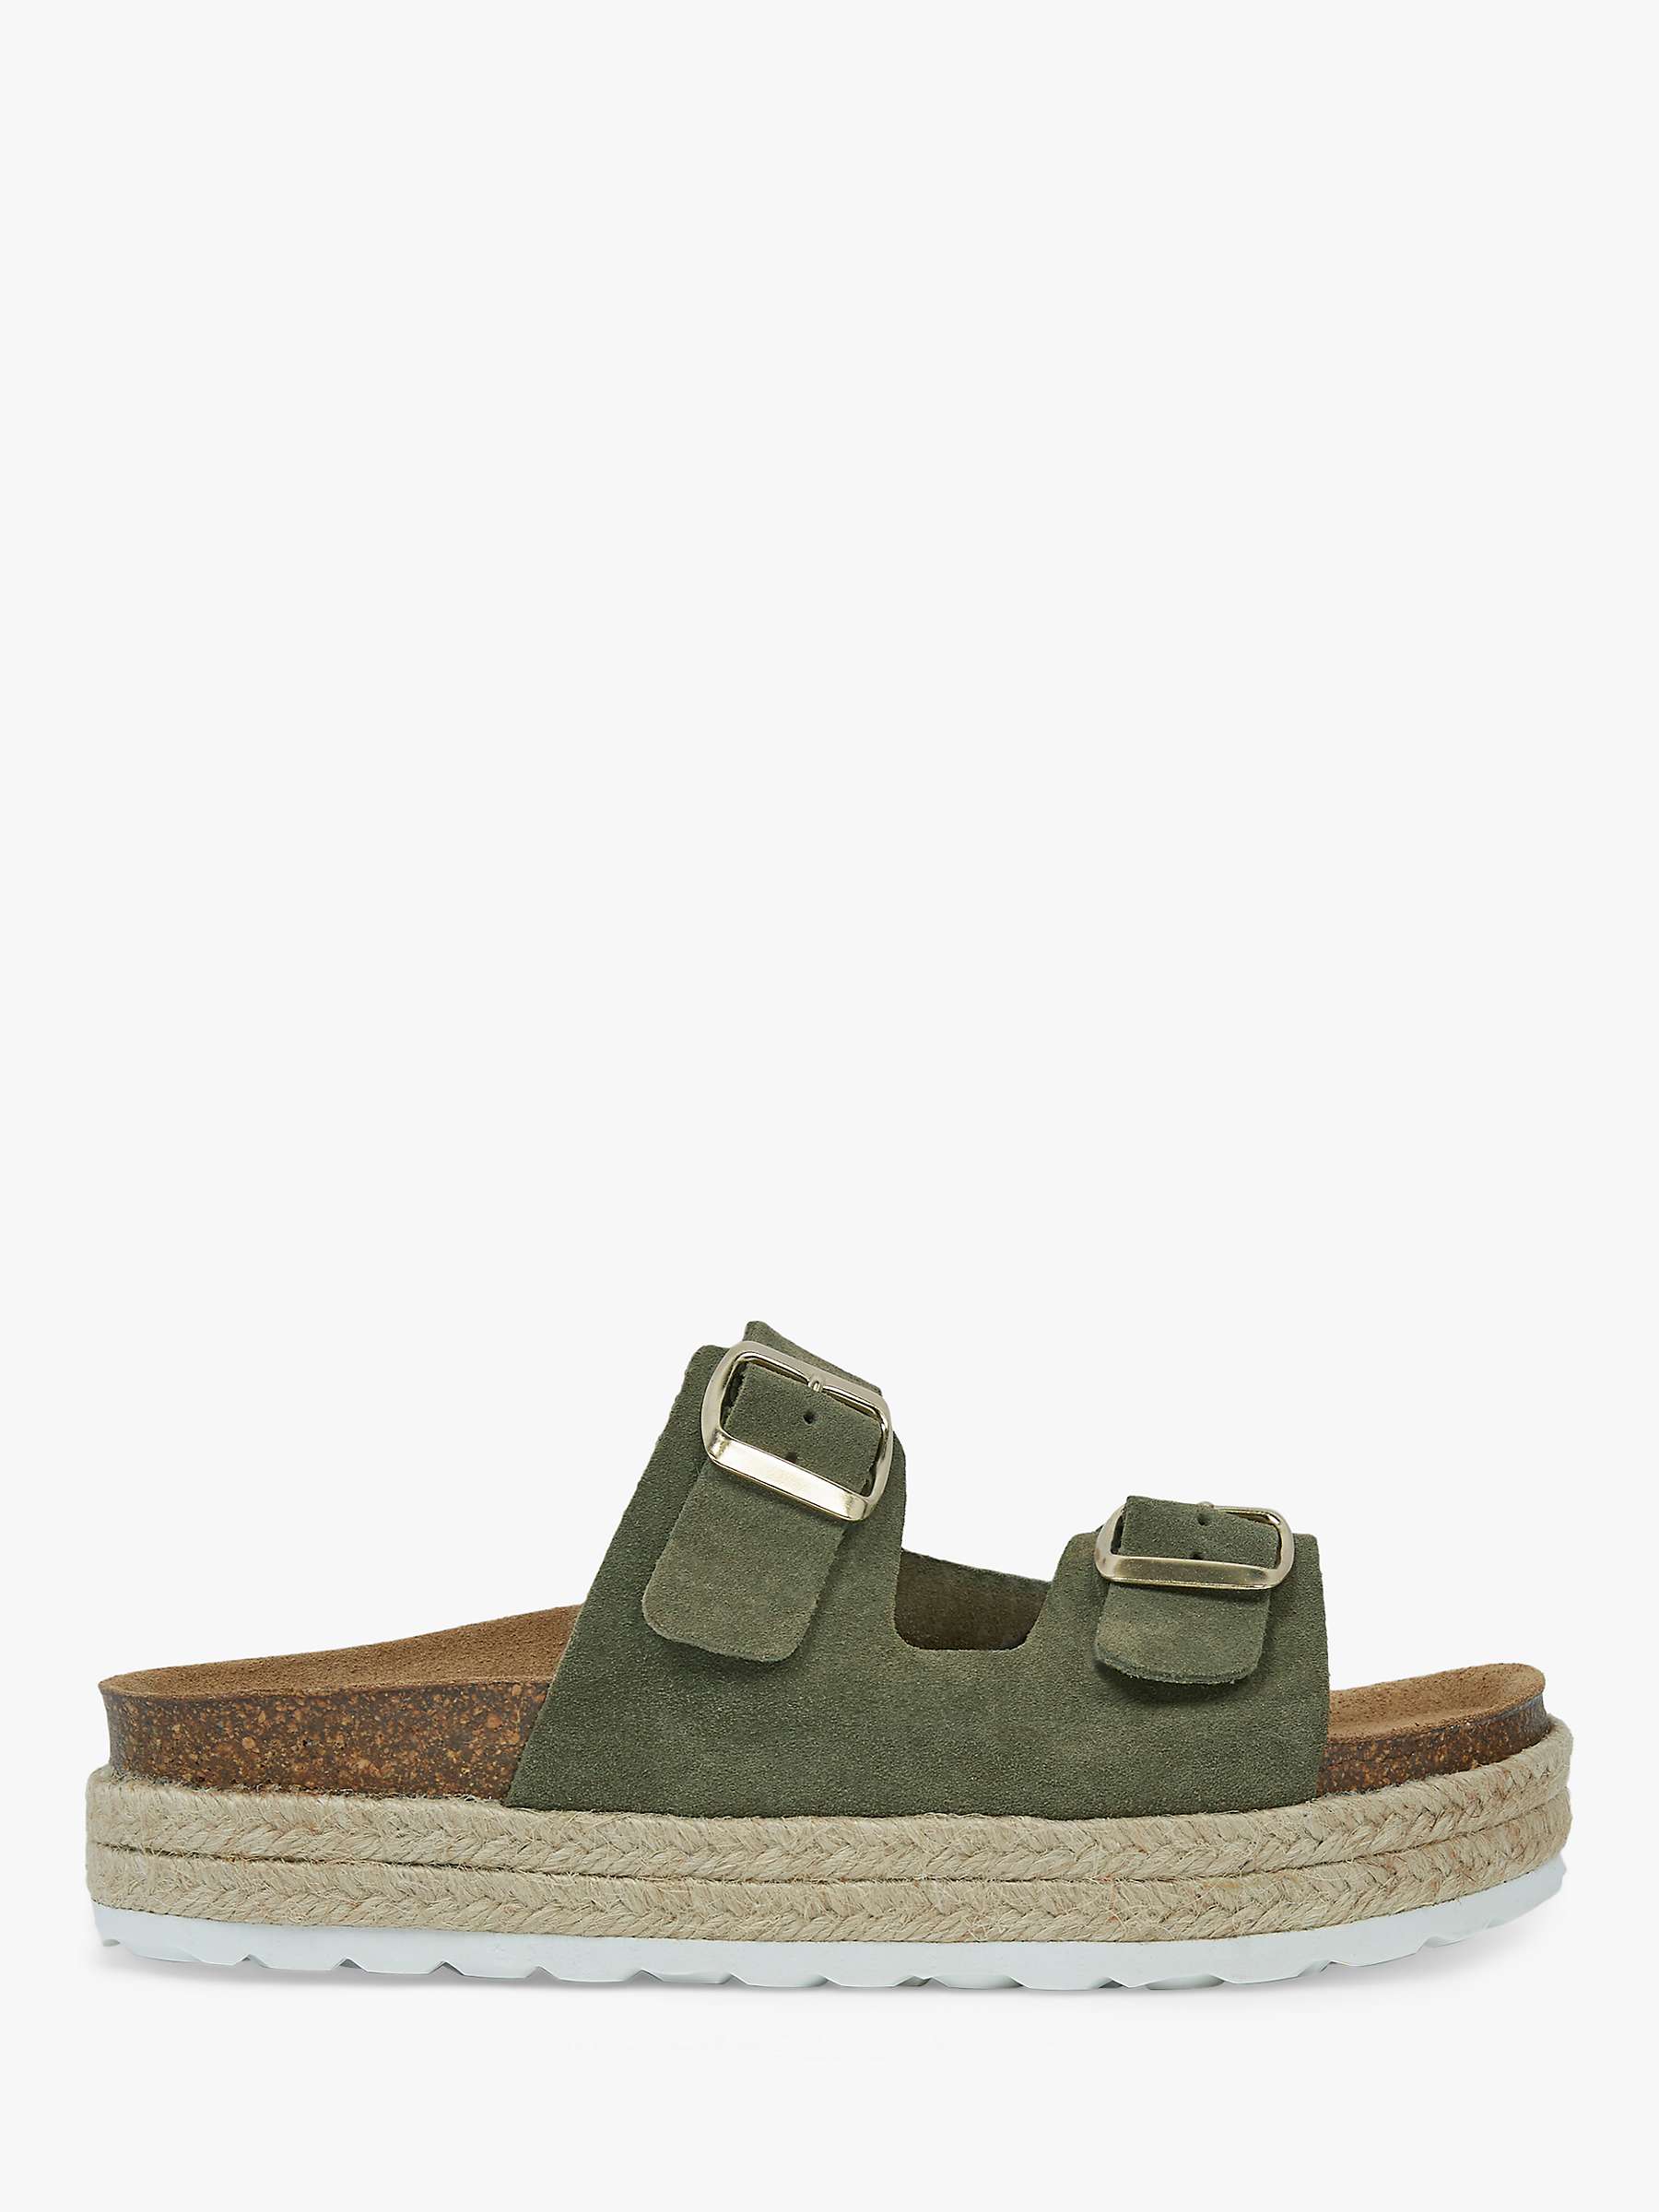 Buy Celtic & Co. Double Buckle Suede Sliders Online at johnlewis.com